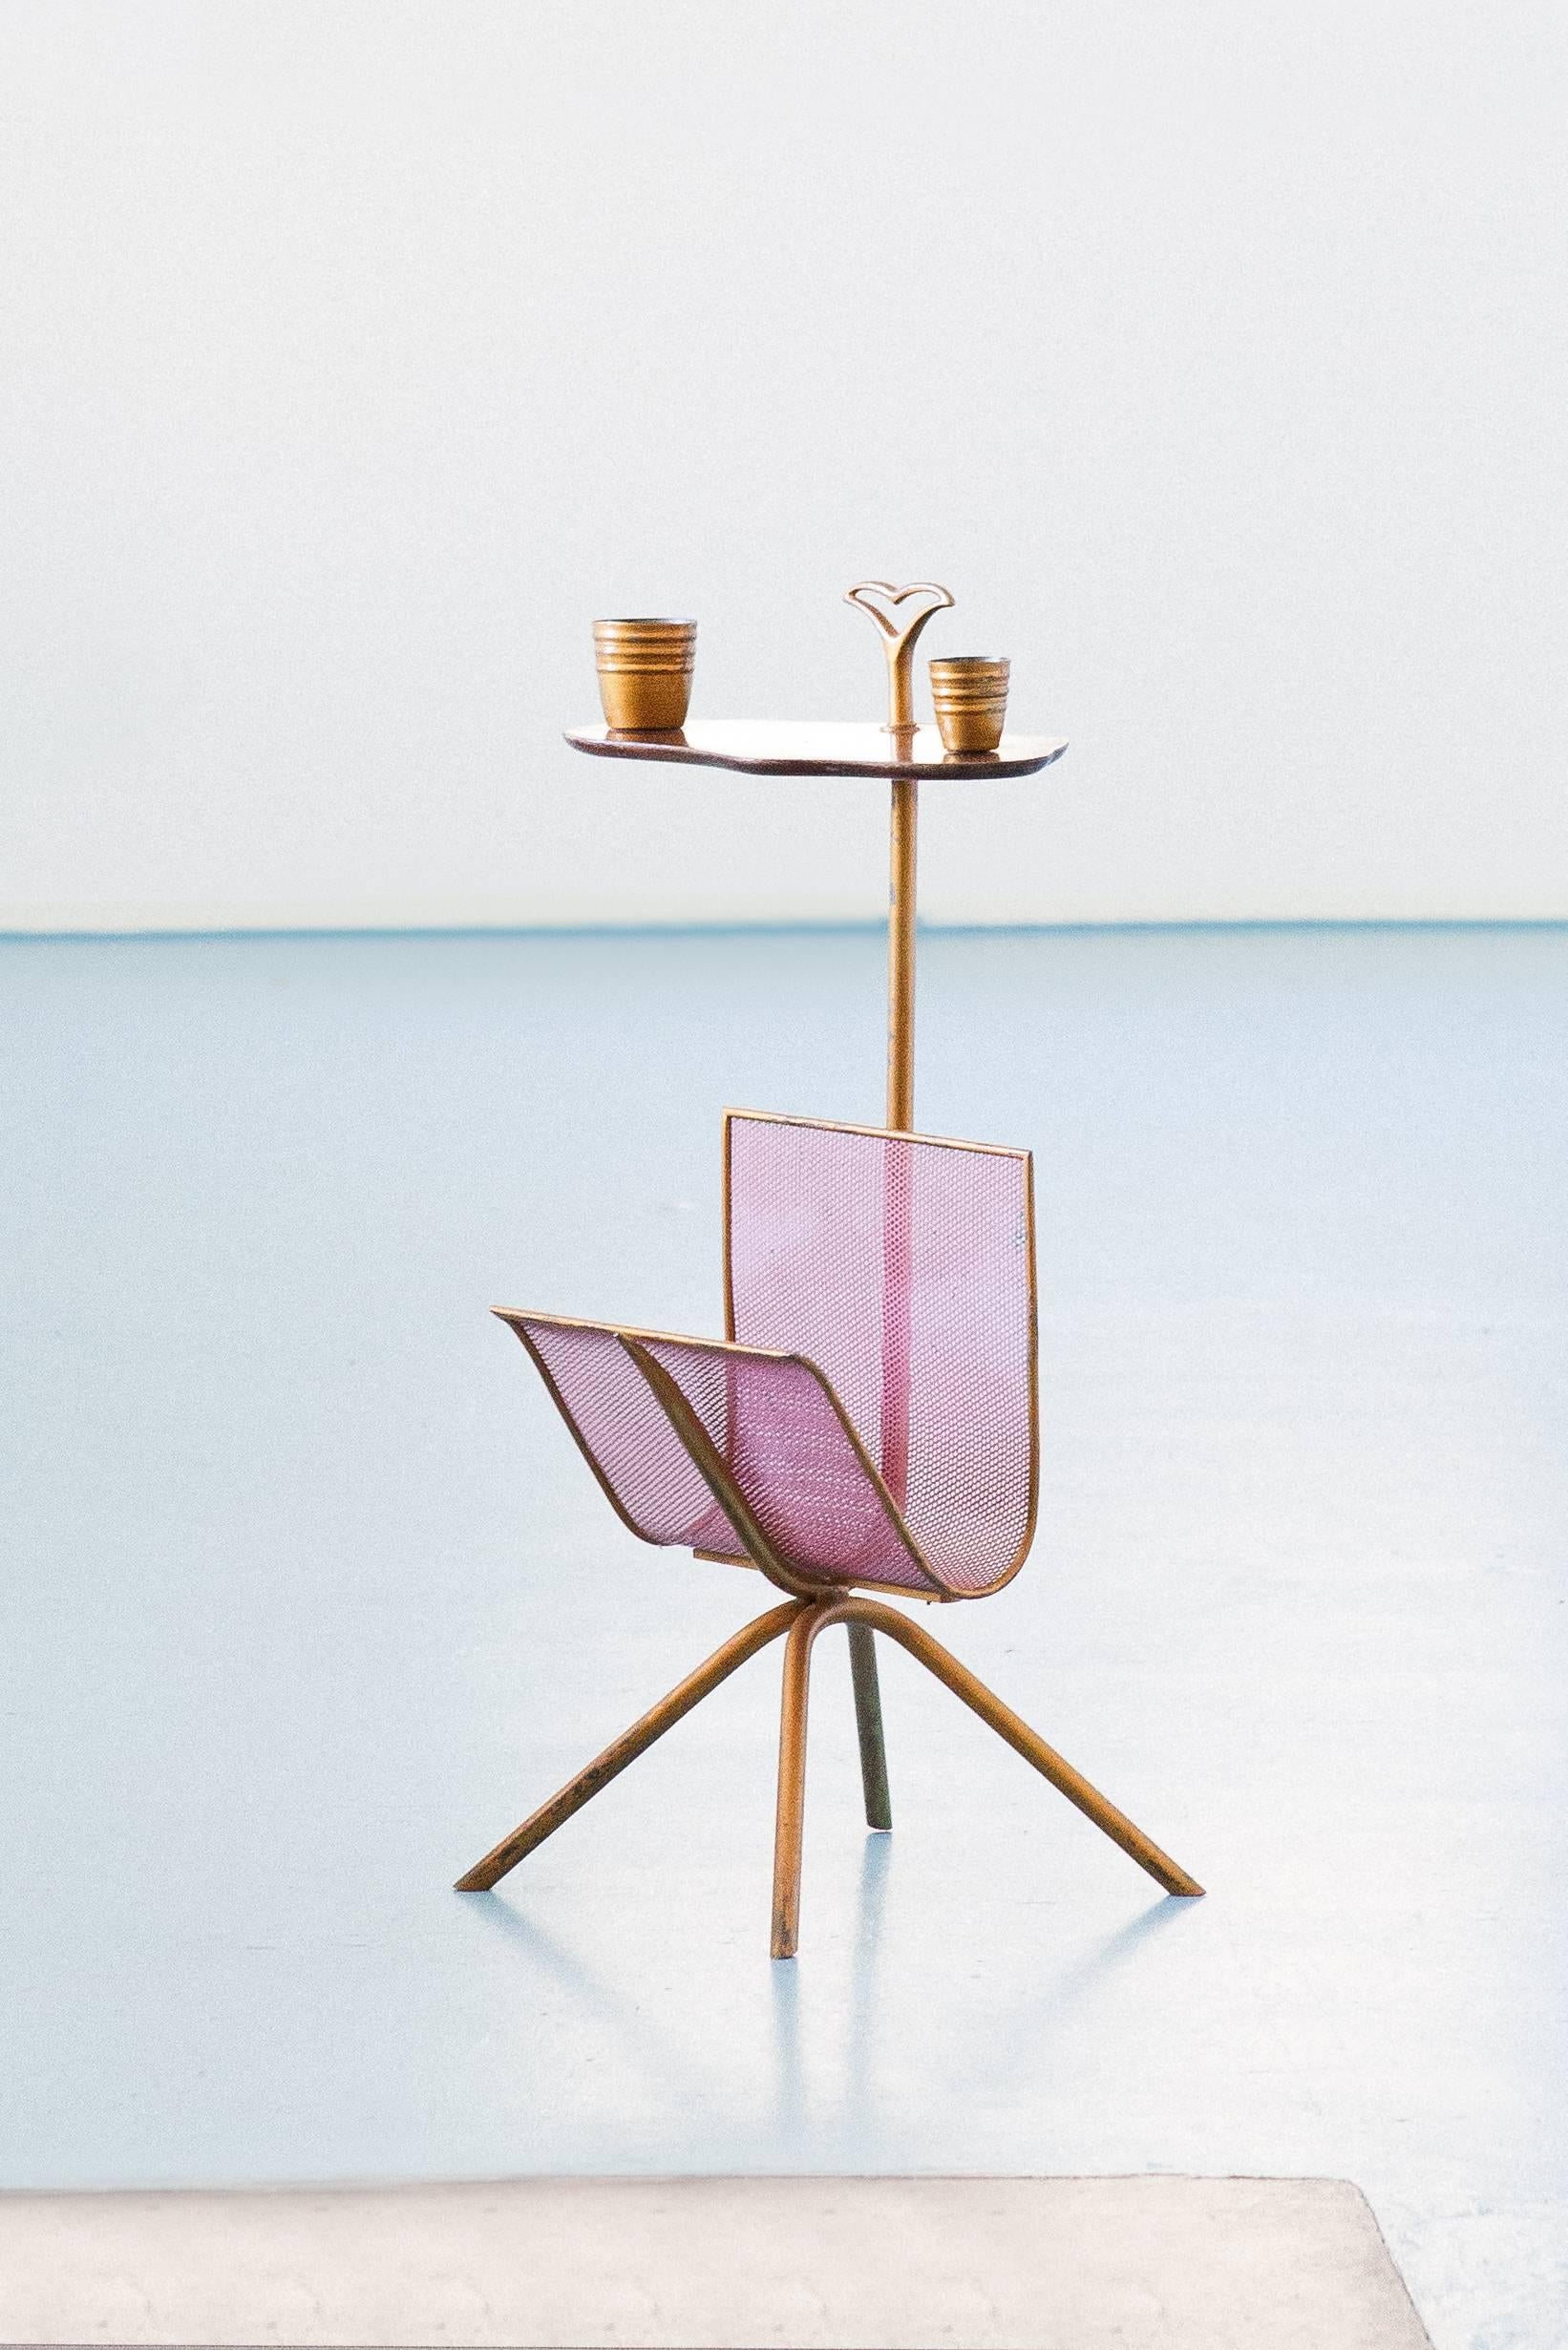 A side table with magazine rack , manufactured in Italy in 1950s
Solid brass gold paint finished frame with original patina , little mahogany wooden plane and four little brass glassess coordinated . 
The magazine holder is pink enameled .

This is